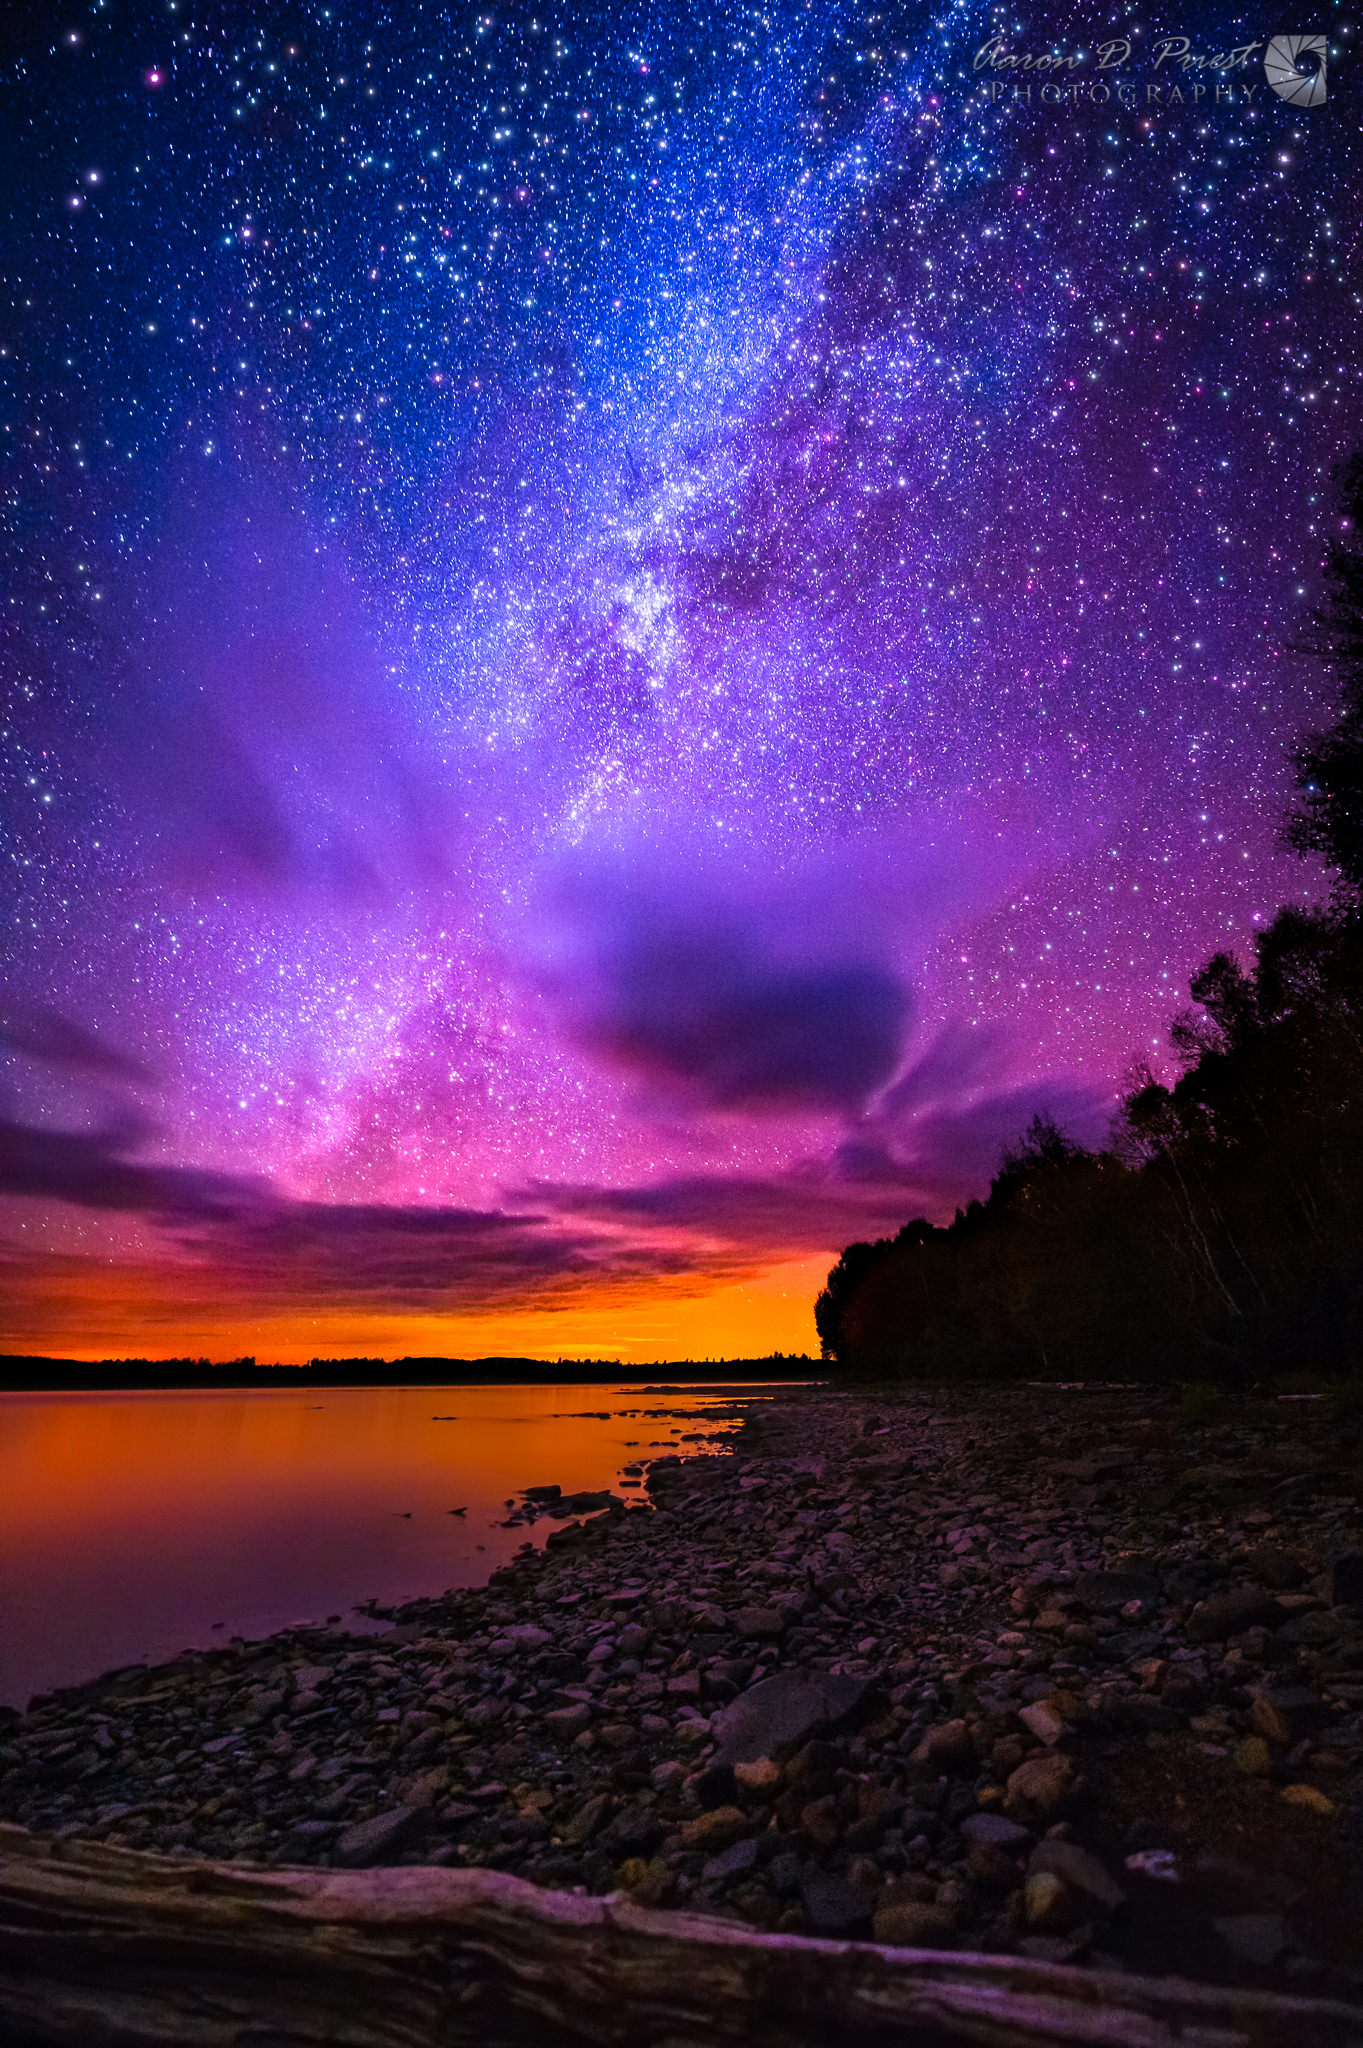 Photographing the Milky Way - A Detailed Guide - Photography Life